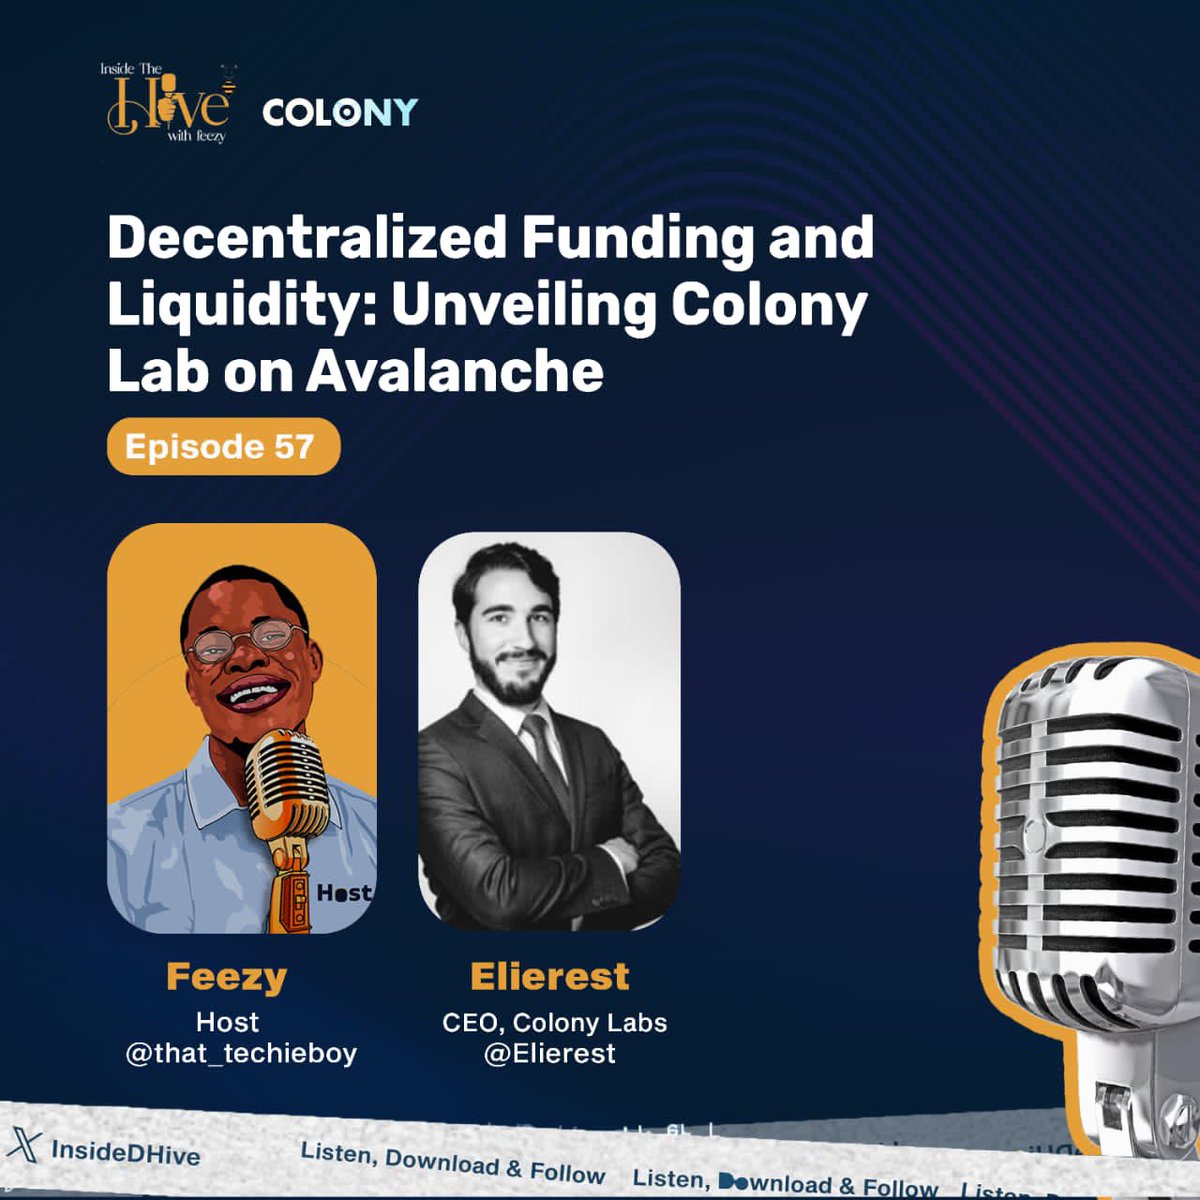 I’m excited to having the @ElieRest (CEO of @Colonylab) on this exciting episode on TheHive. Another time to explore the #Avax ecosystem with this amazing project. Feel free to shoot some questions you’ll love me to ask 👇